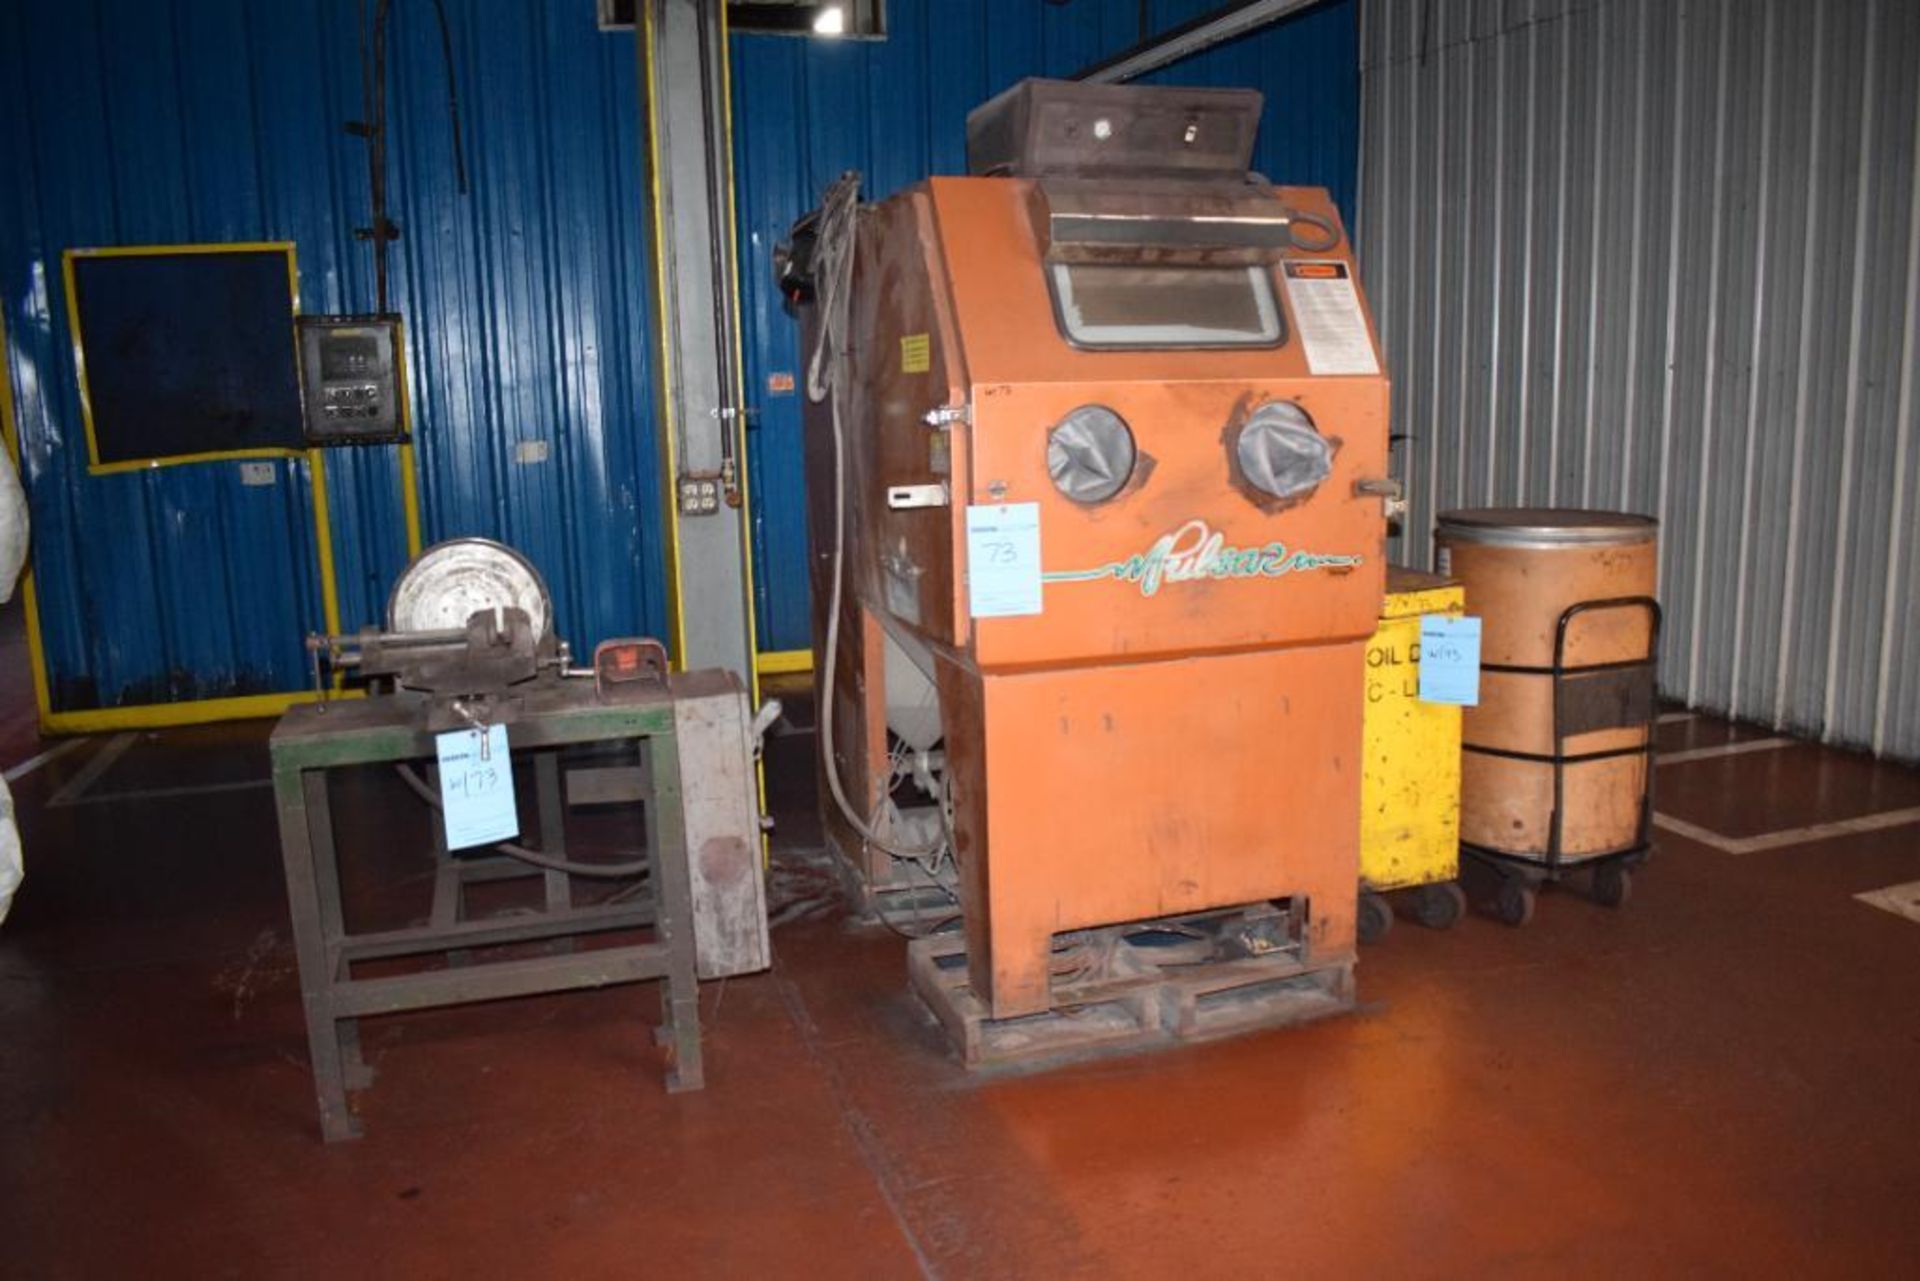 Lot Consisting Of: (1) Clemco Sandblast cabinet, model Pulsar III 1PH, serial# 47346 with dust colle